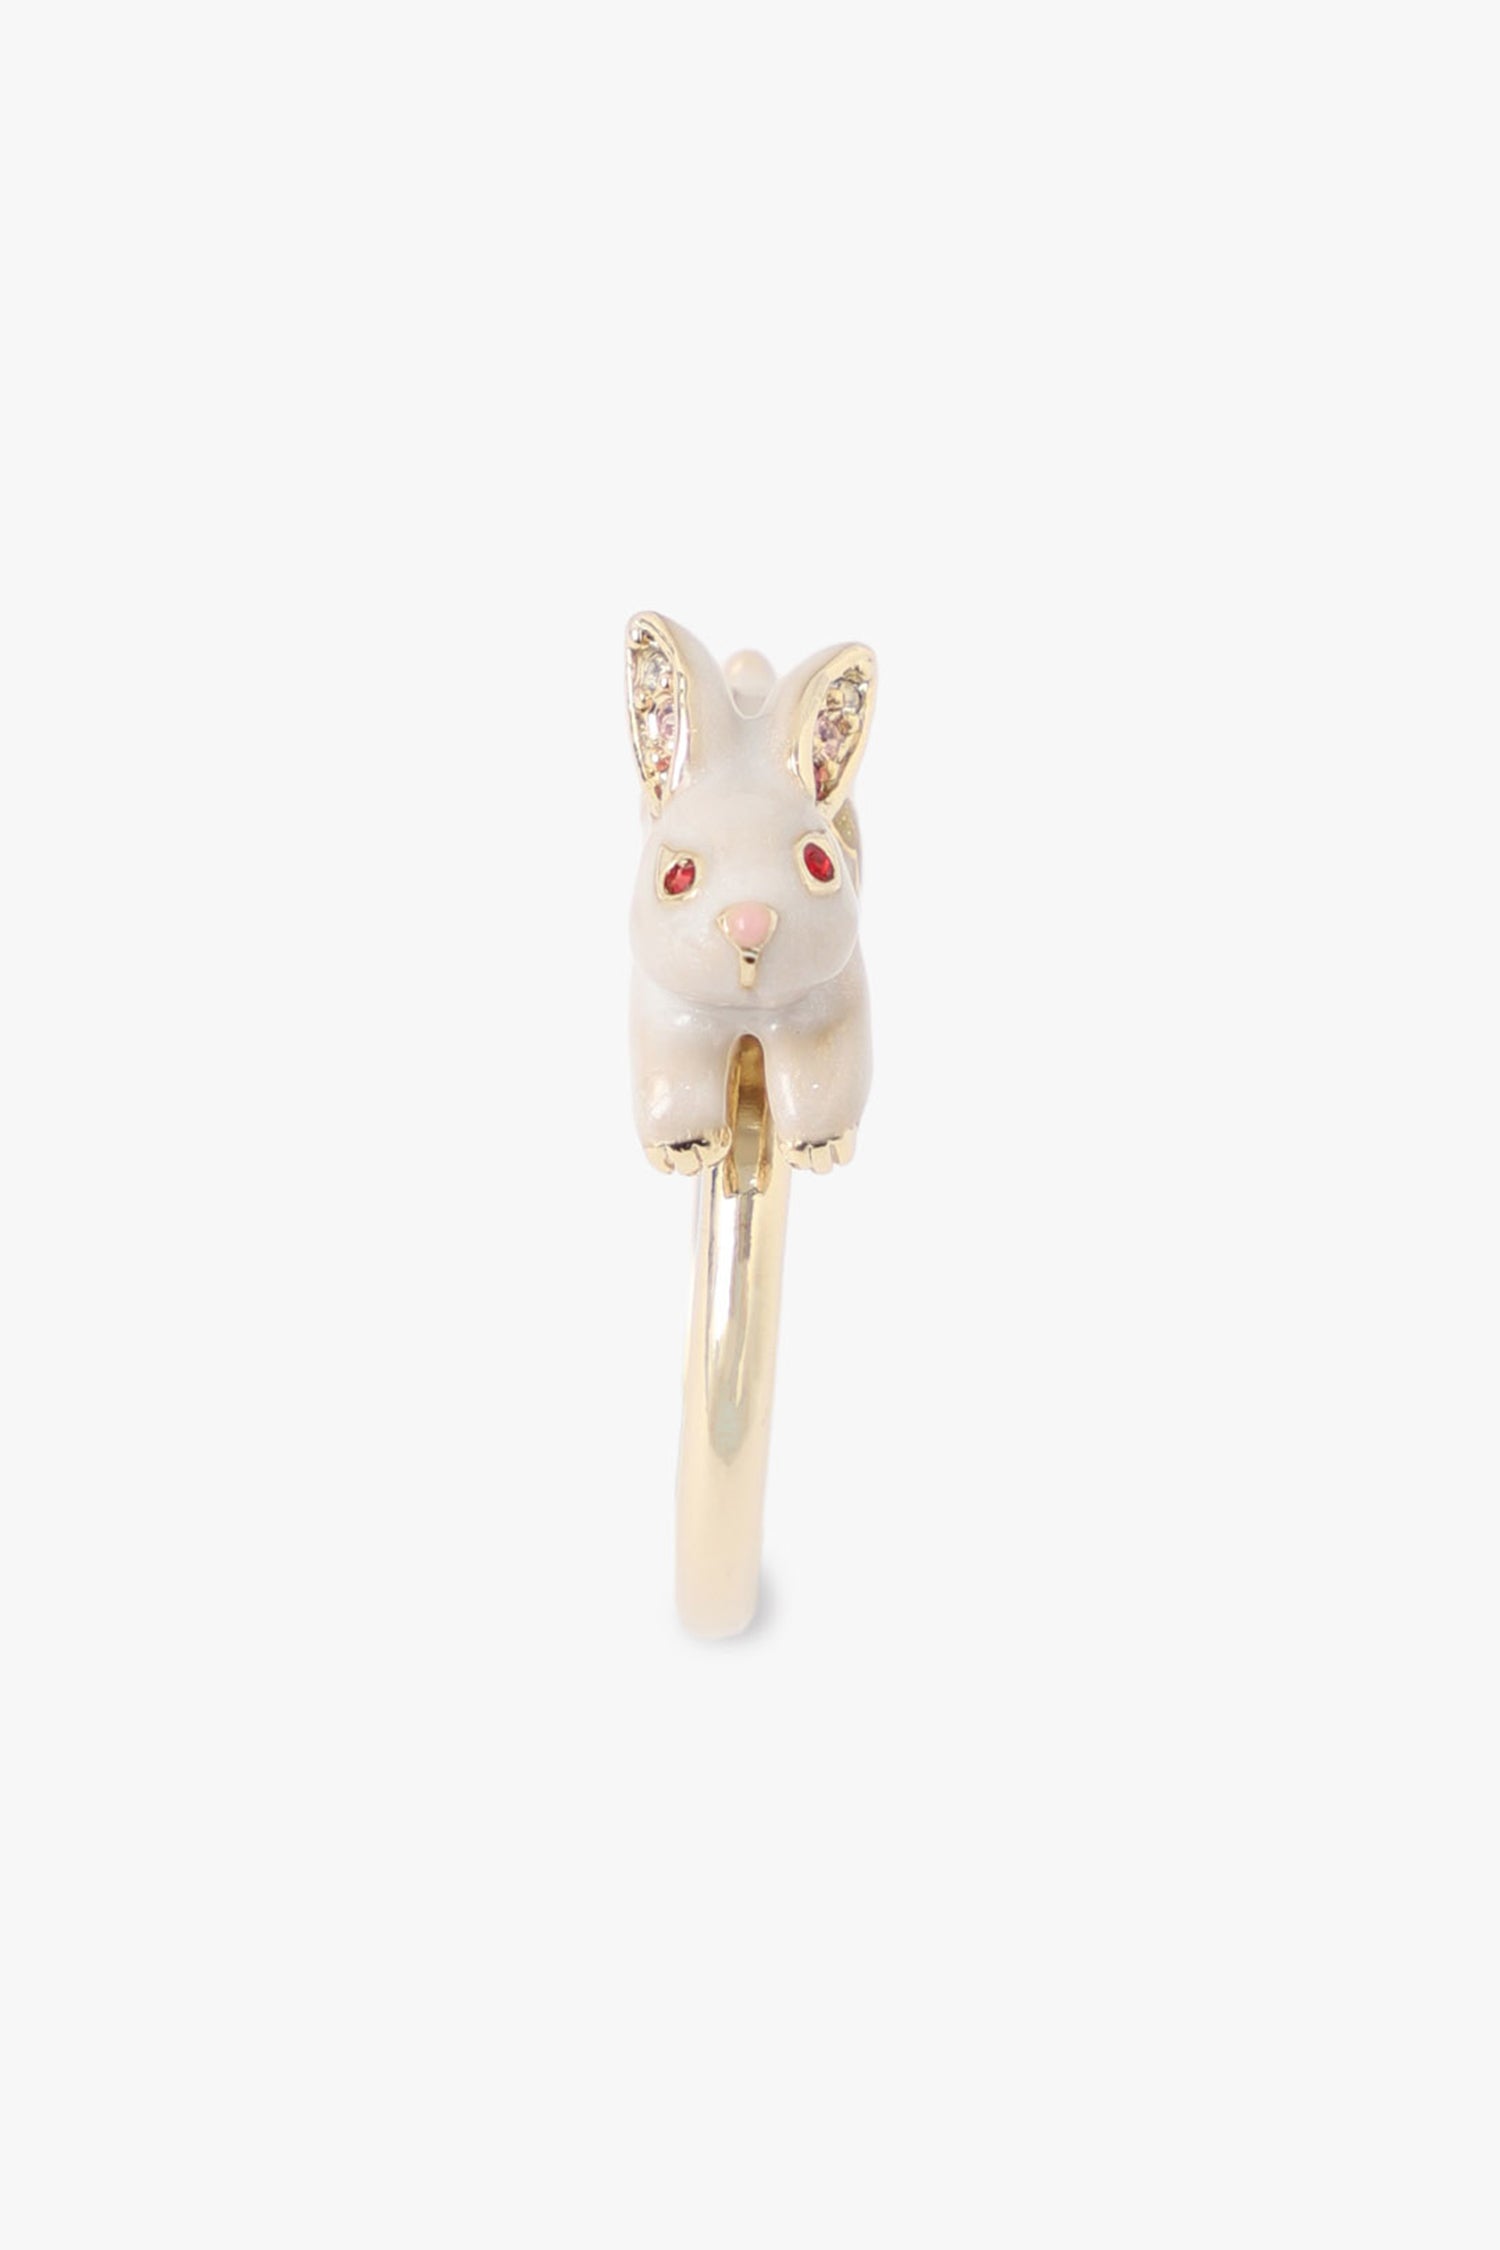 White Rabbit with red eyes, golden on ears, paw, a pink nose, Running on a golden metal ring 